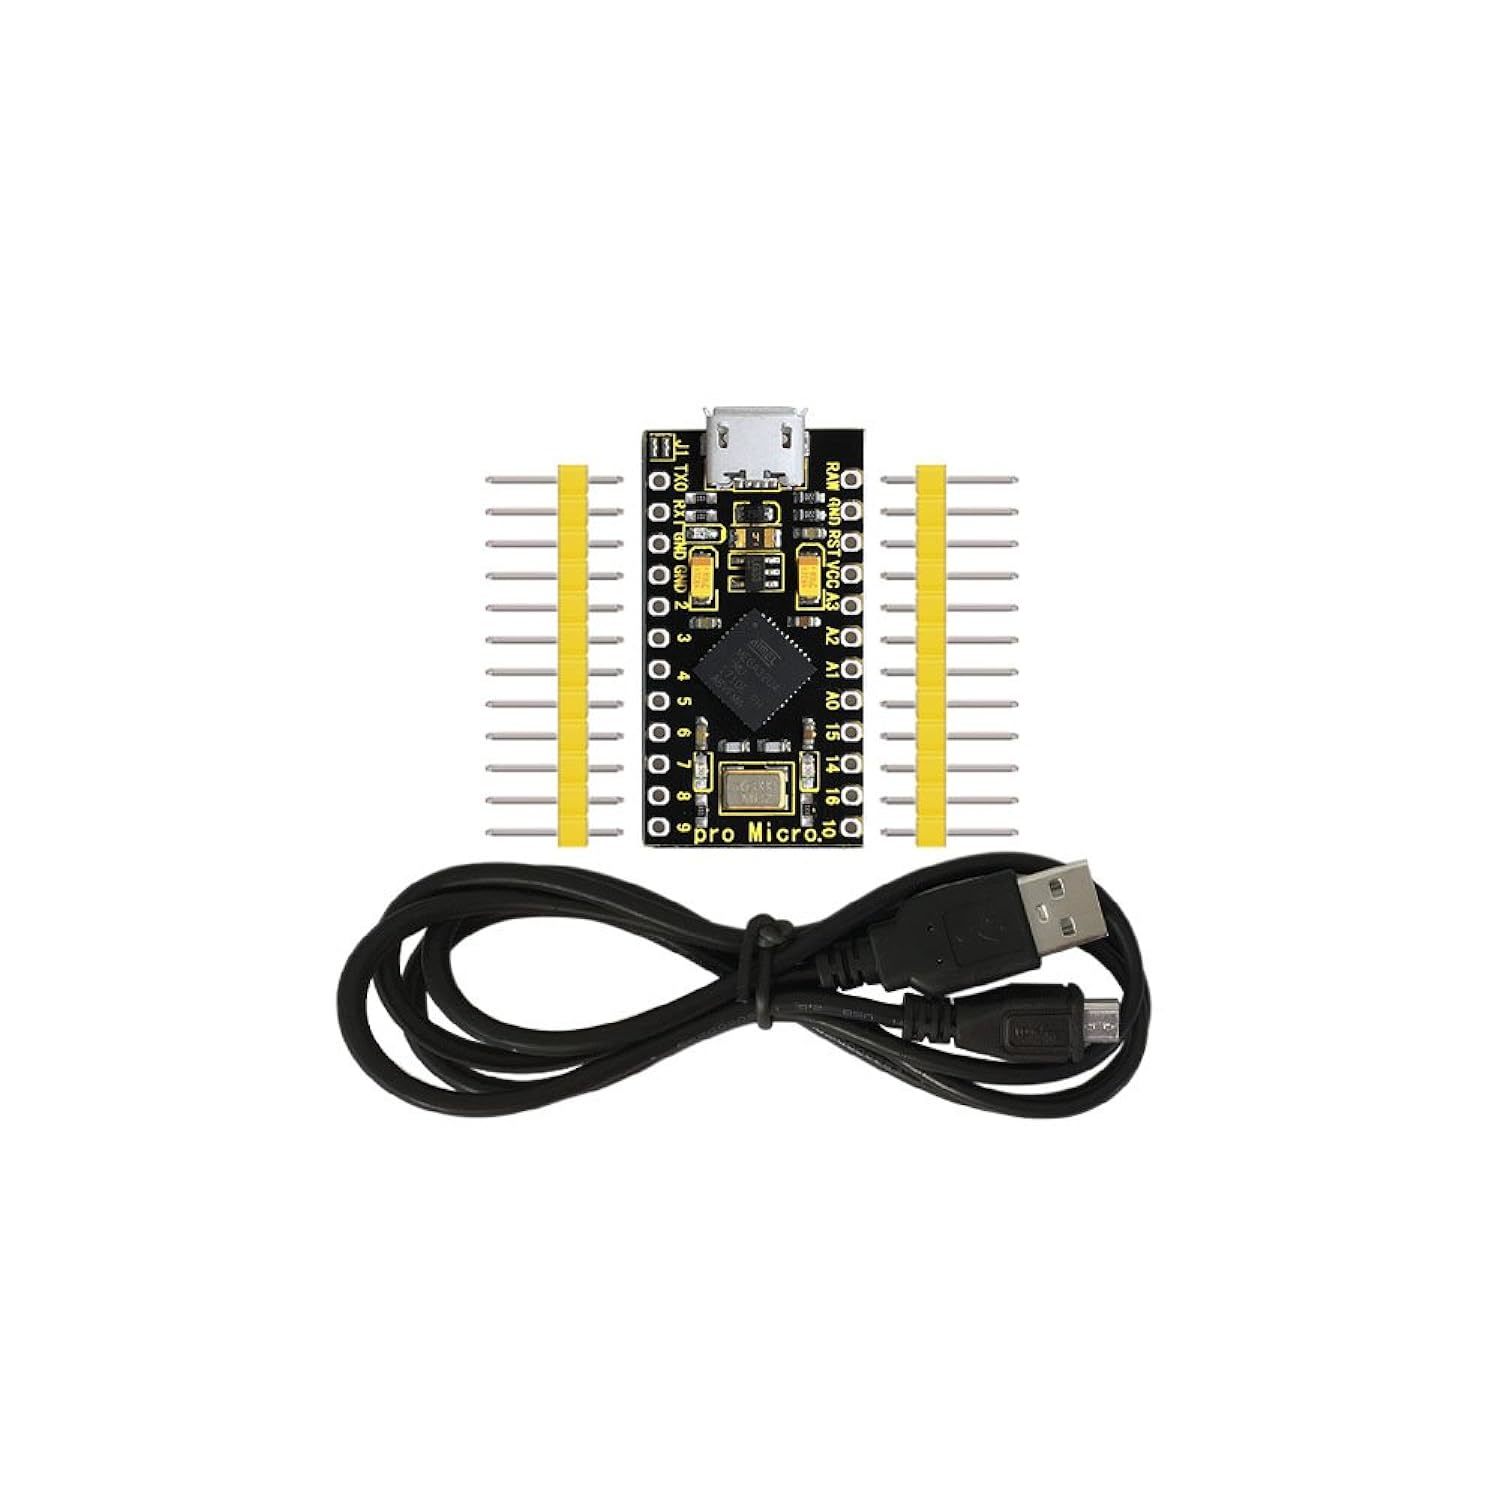 KEYESTUDIO Pro Micro Atmega32U4 5V with USB Cable for Arduino Projects 1PC - $18.99